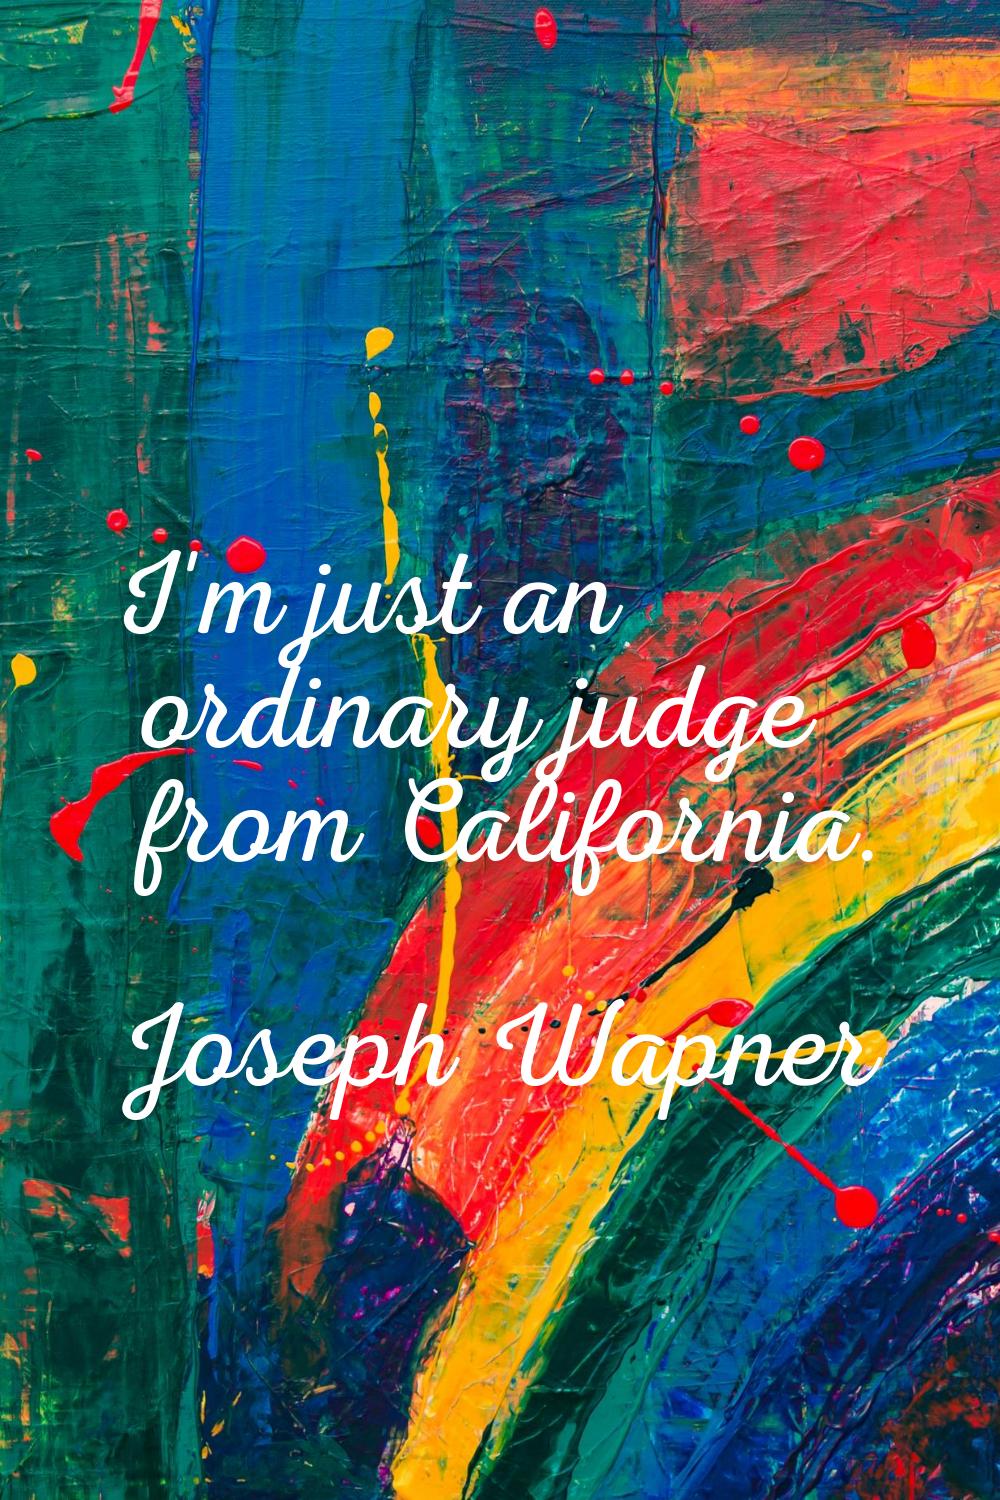 I'm just an ordinary judge from California.